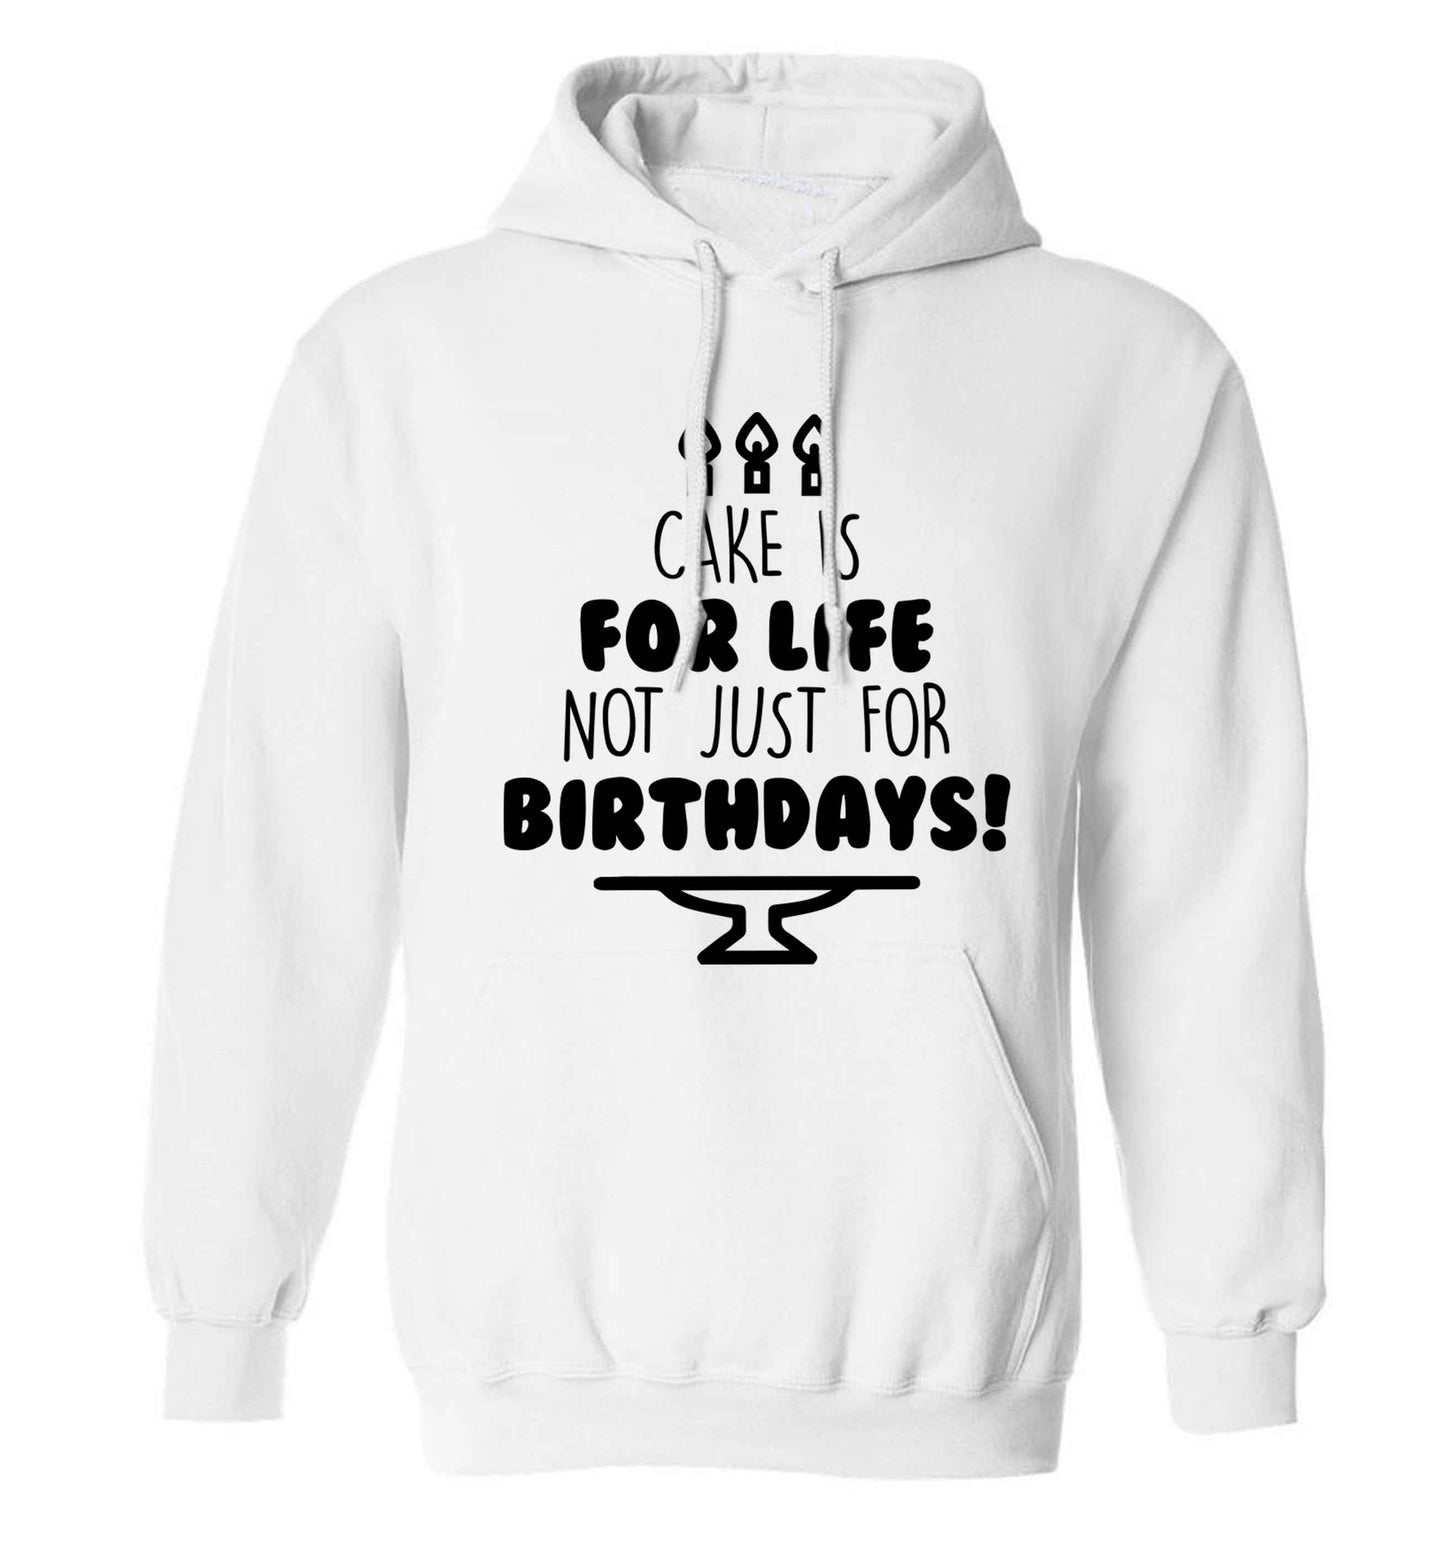 Cake is for life not just for birthdays adults unisex white hoodie 2XL